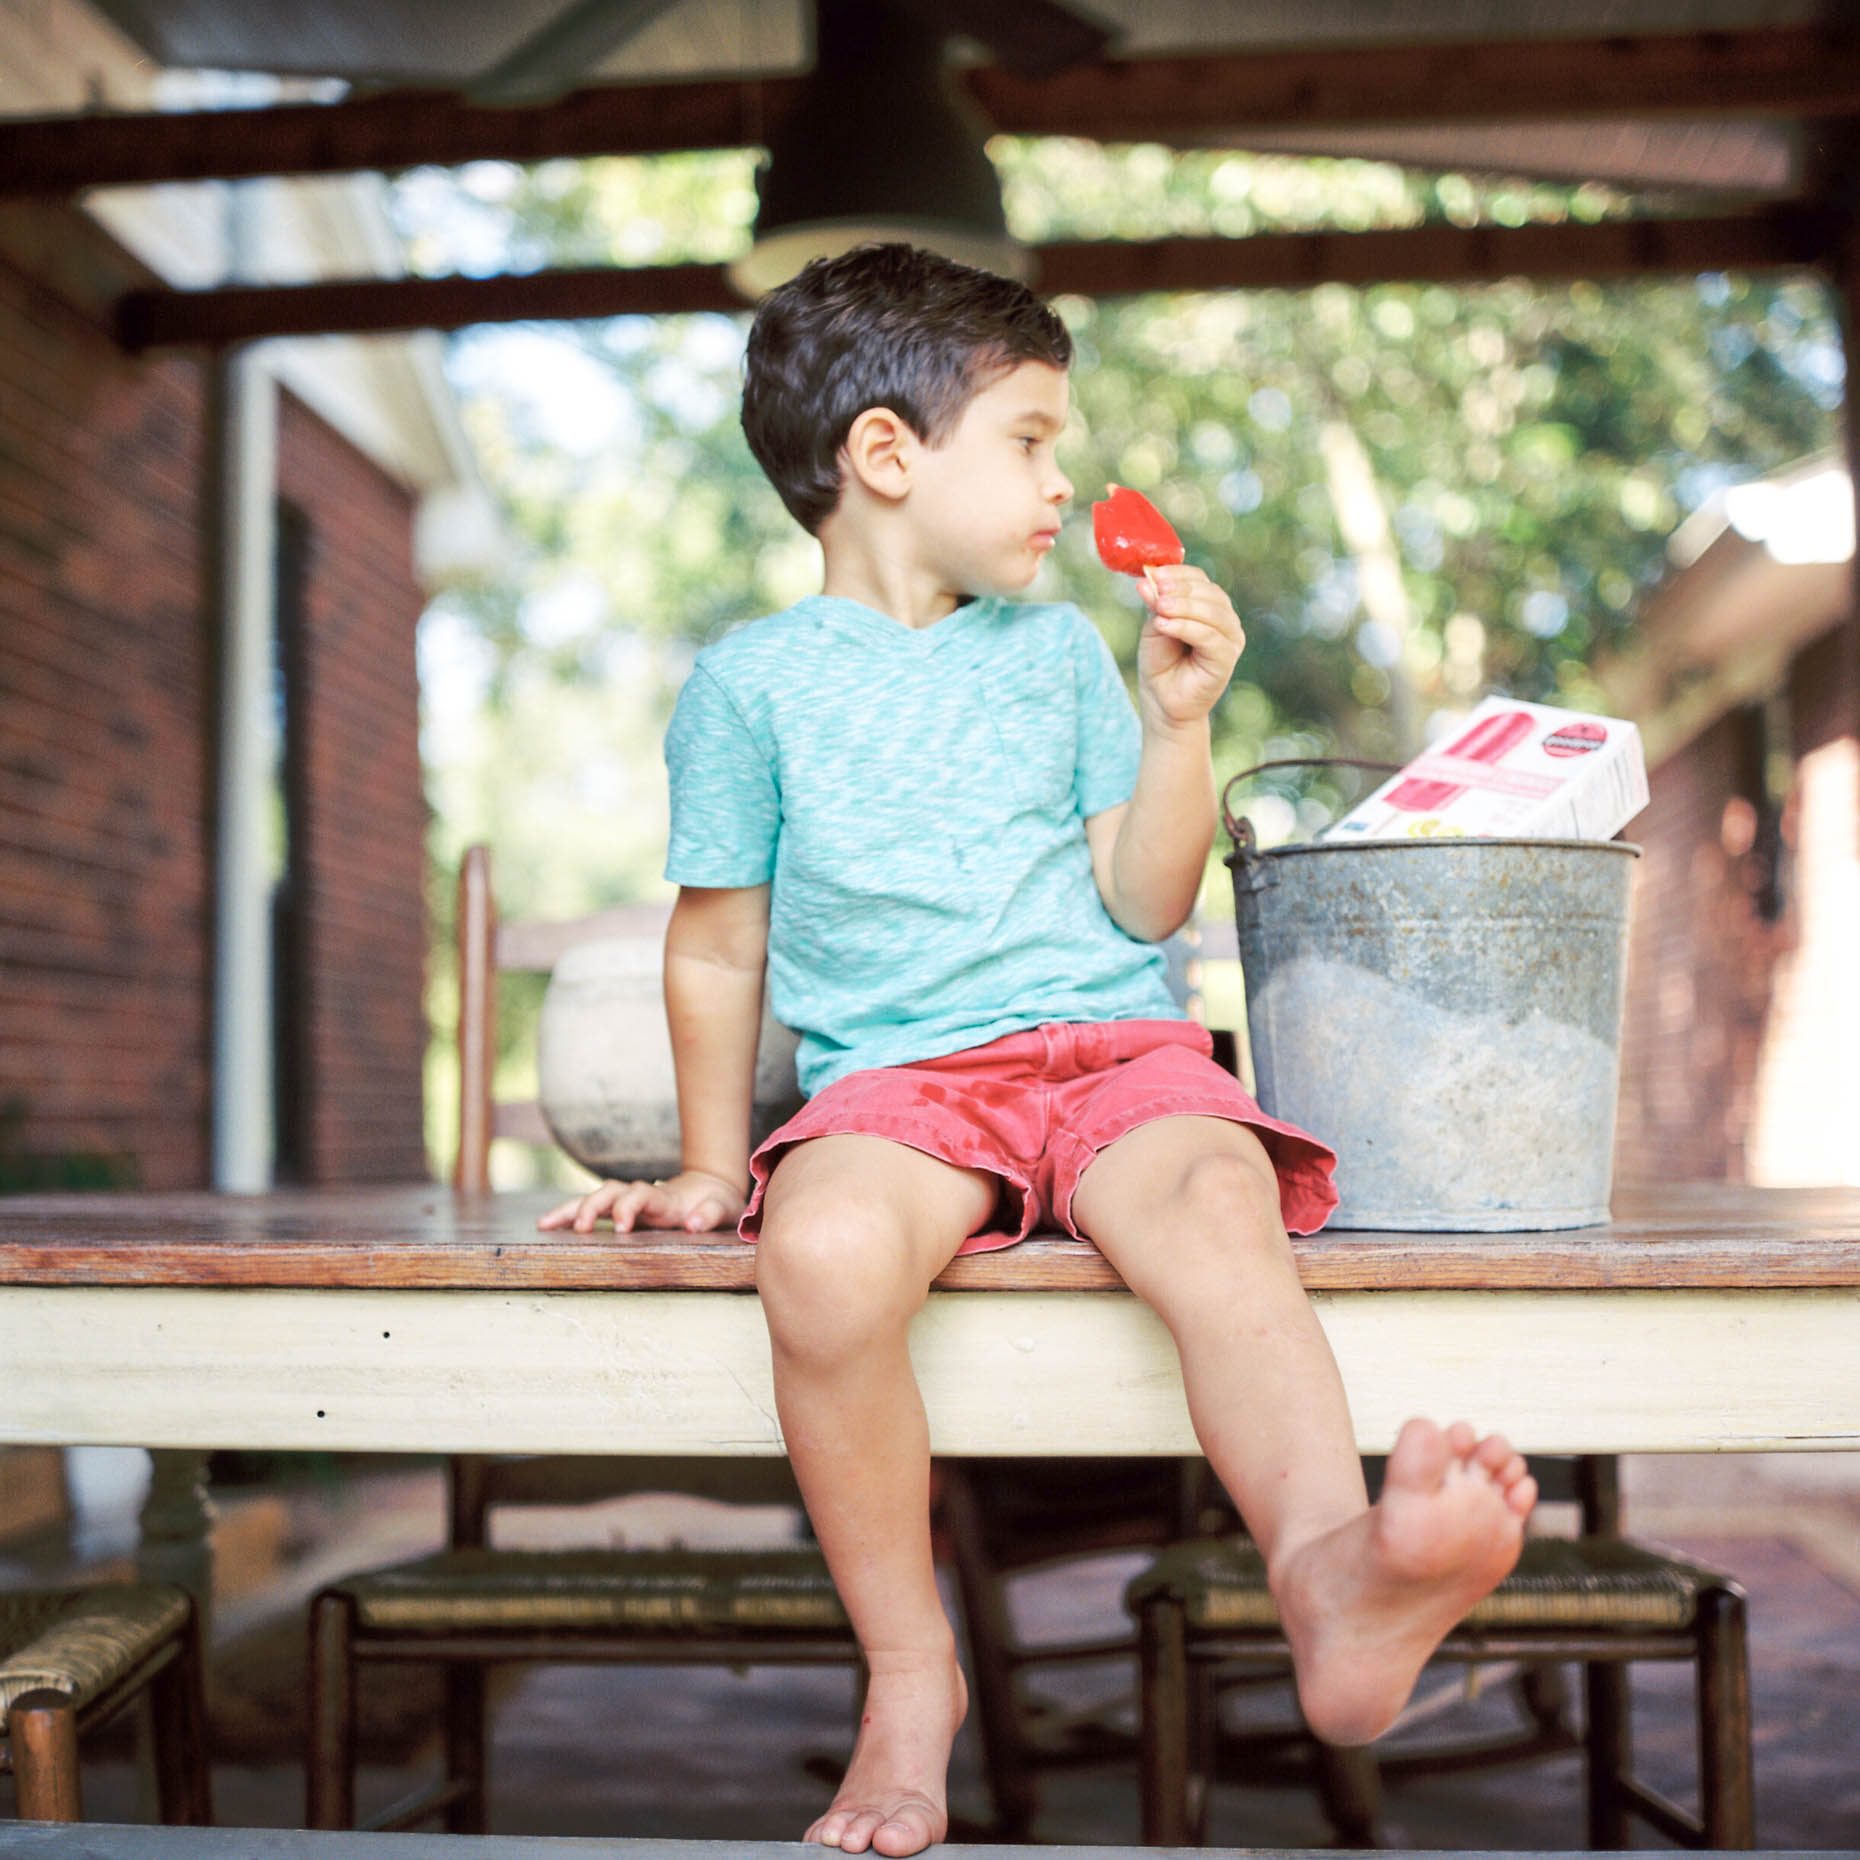 young boy eating an organic popsicle on back porch